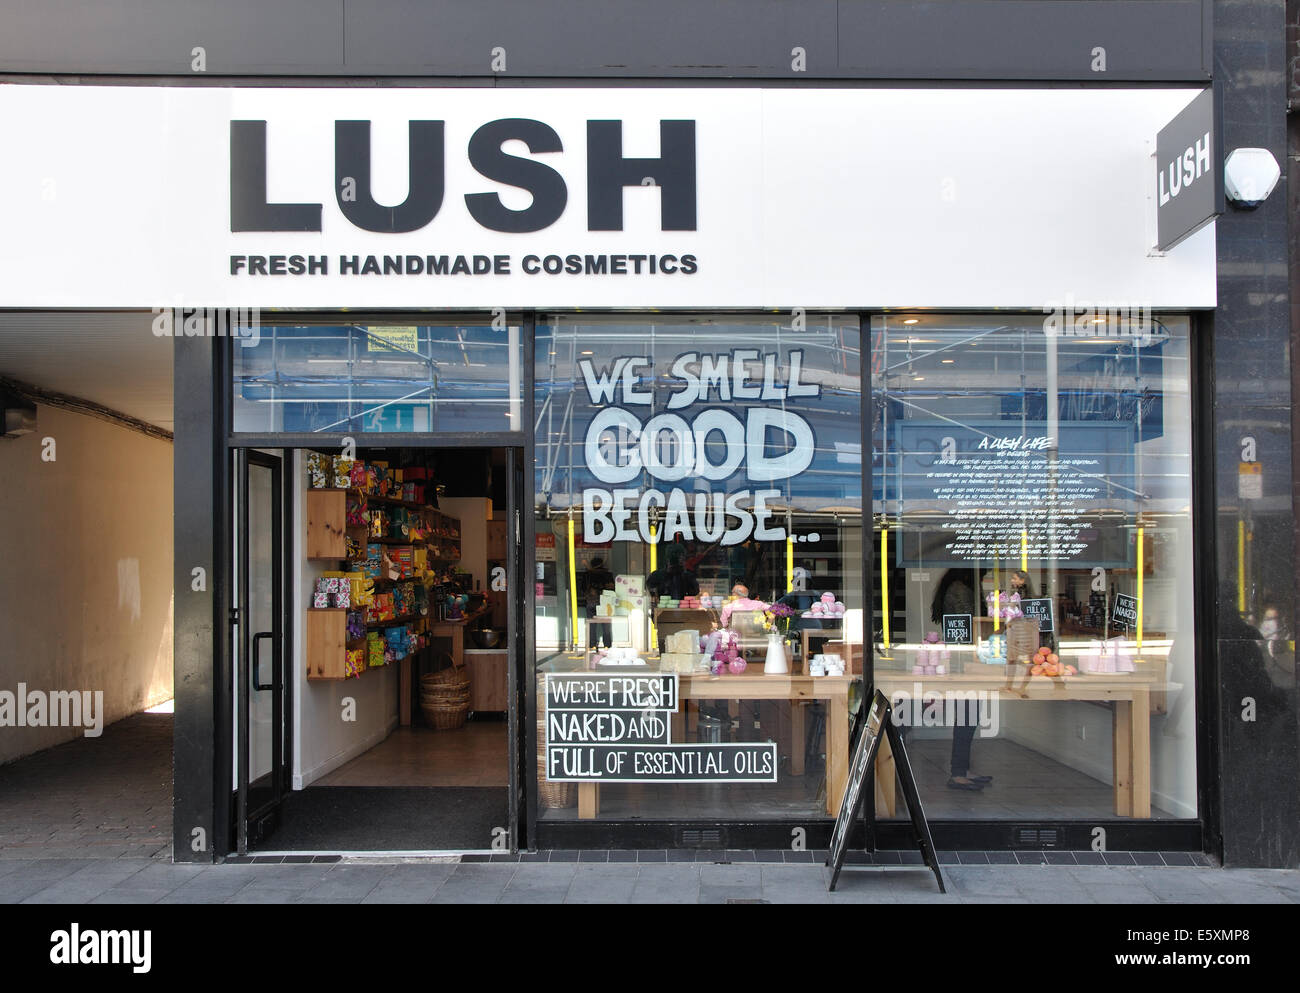 Toulouse, Occitanie France - 06 16 2021: Lush Fresh Handmade Cosmetics Logo  Sign And Text Brand Front Of Store Of Beauty Products Stock Photo, Picture  and Royalty Free Image. Image 170600834.